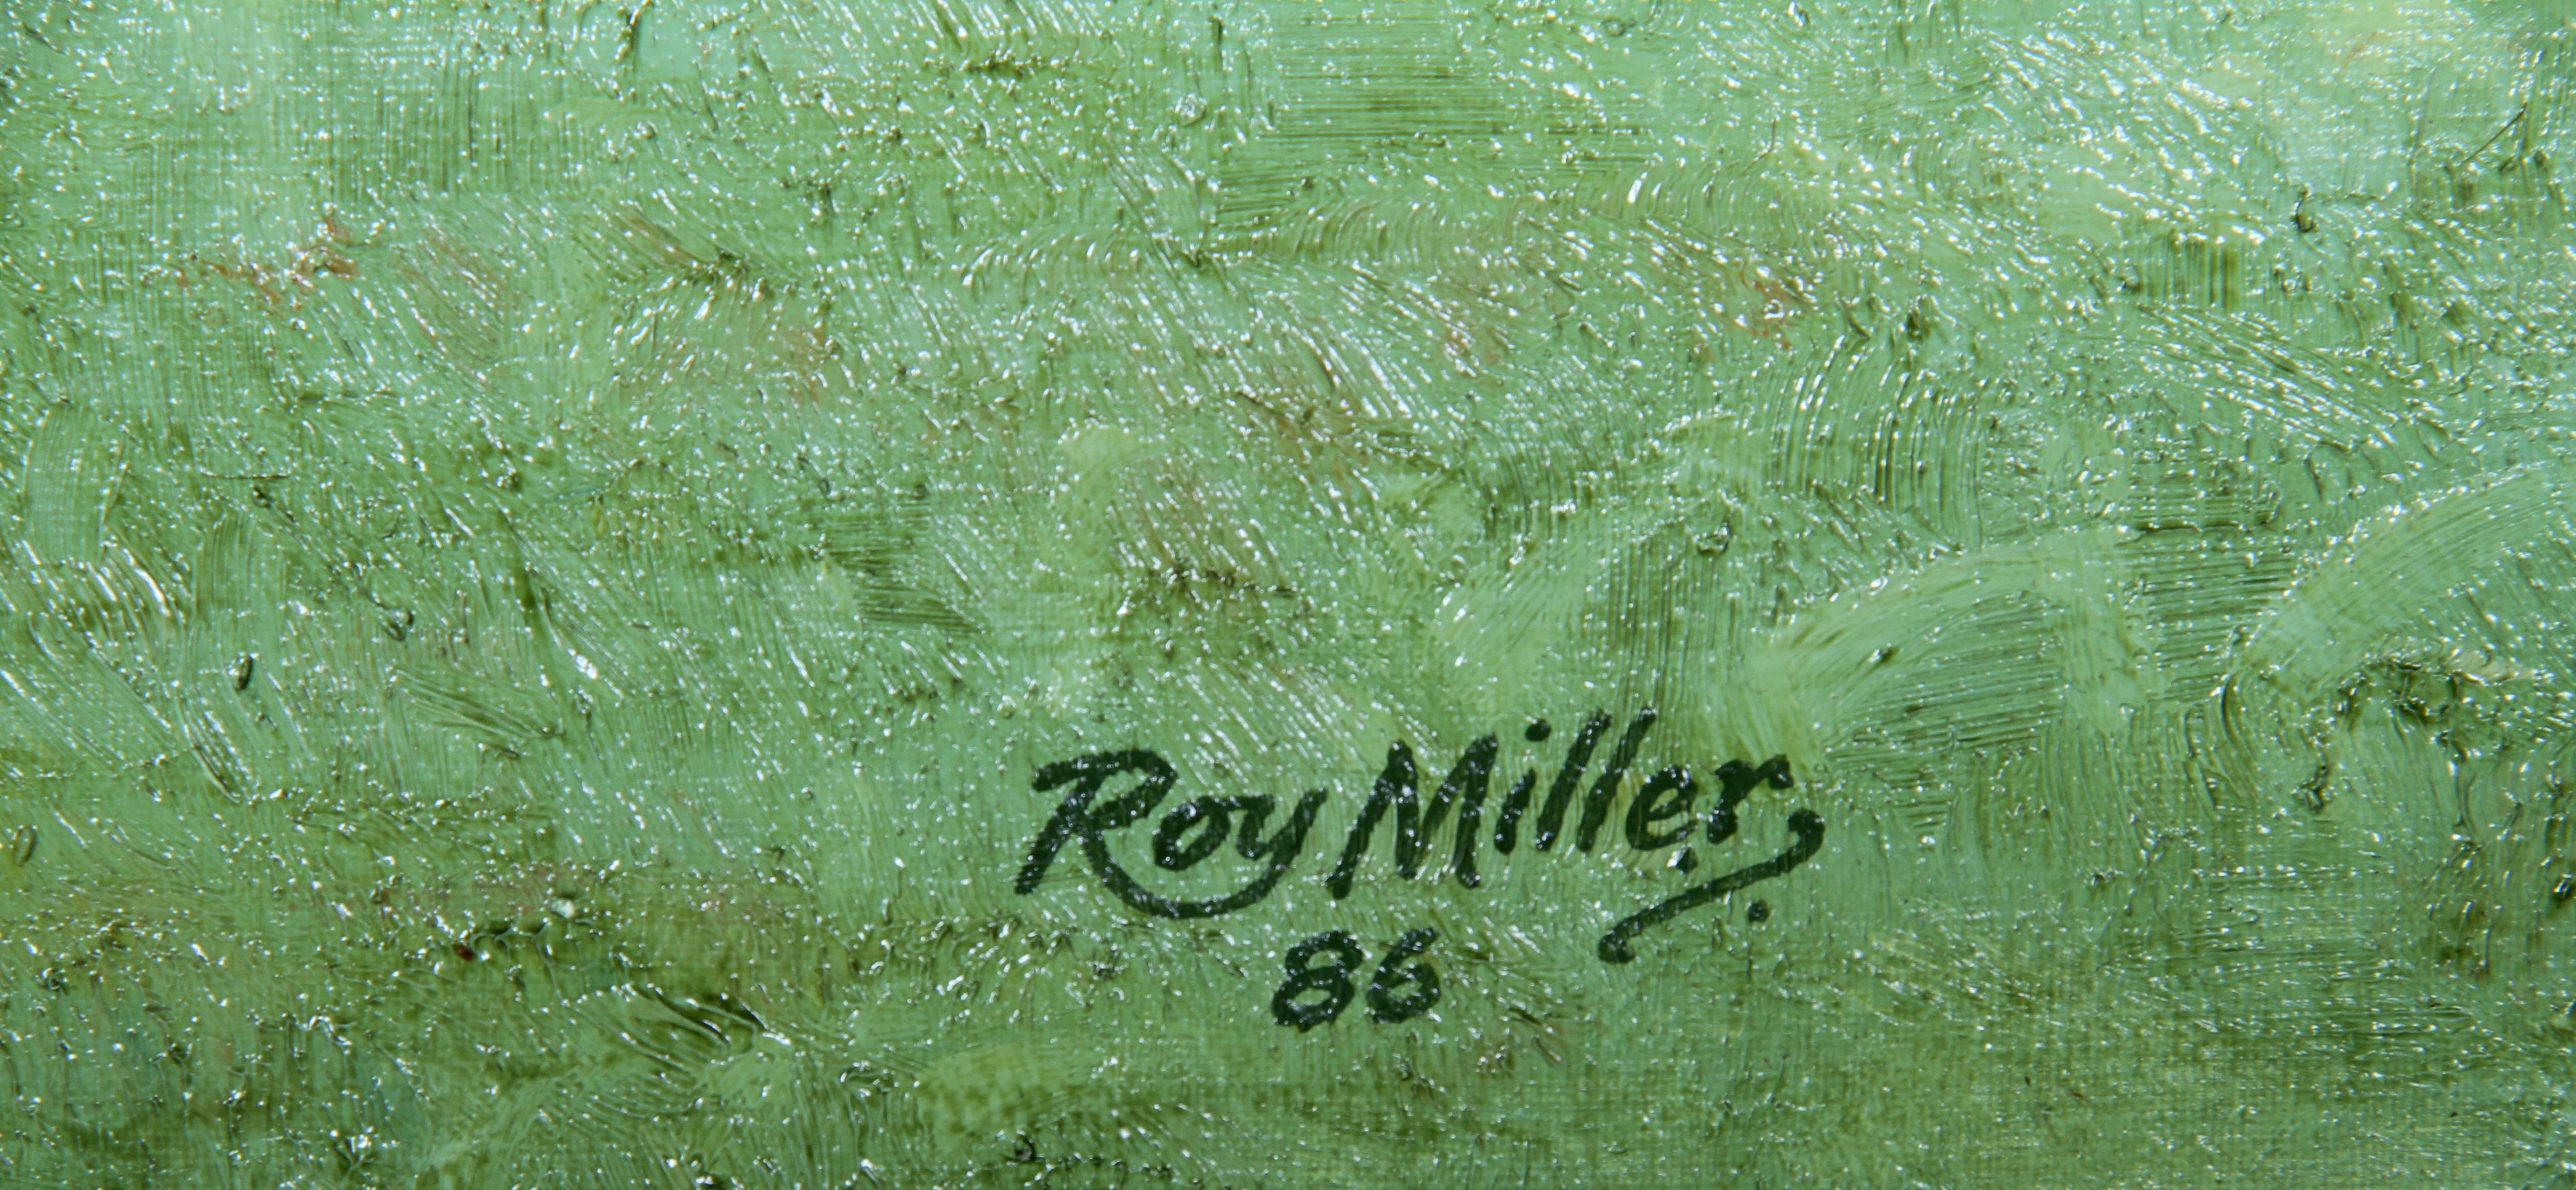 roy miller painting